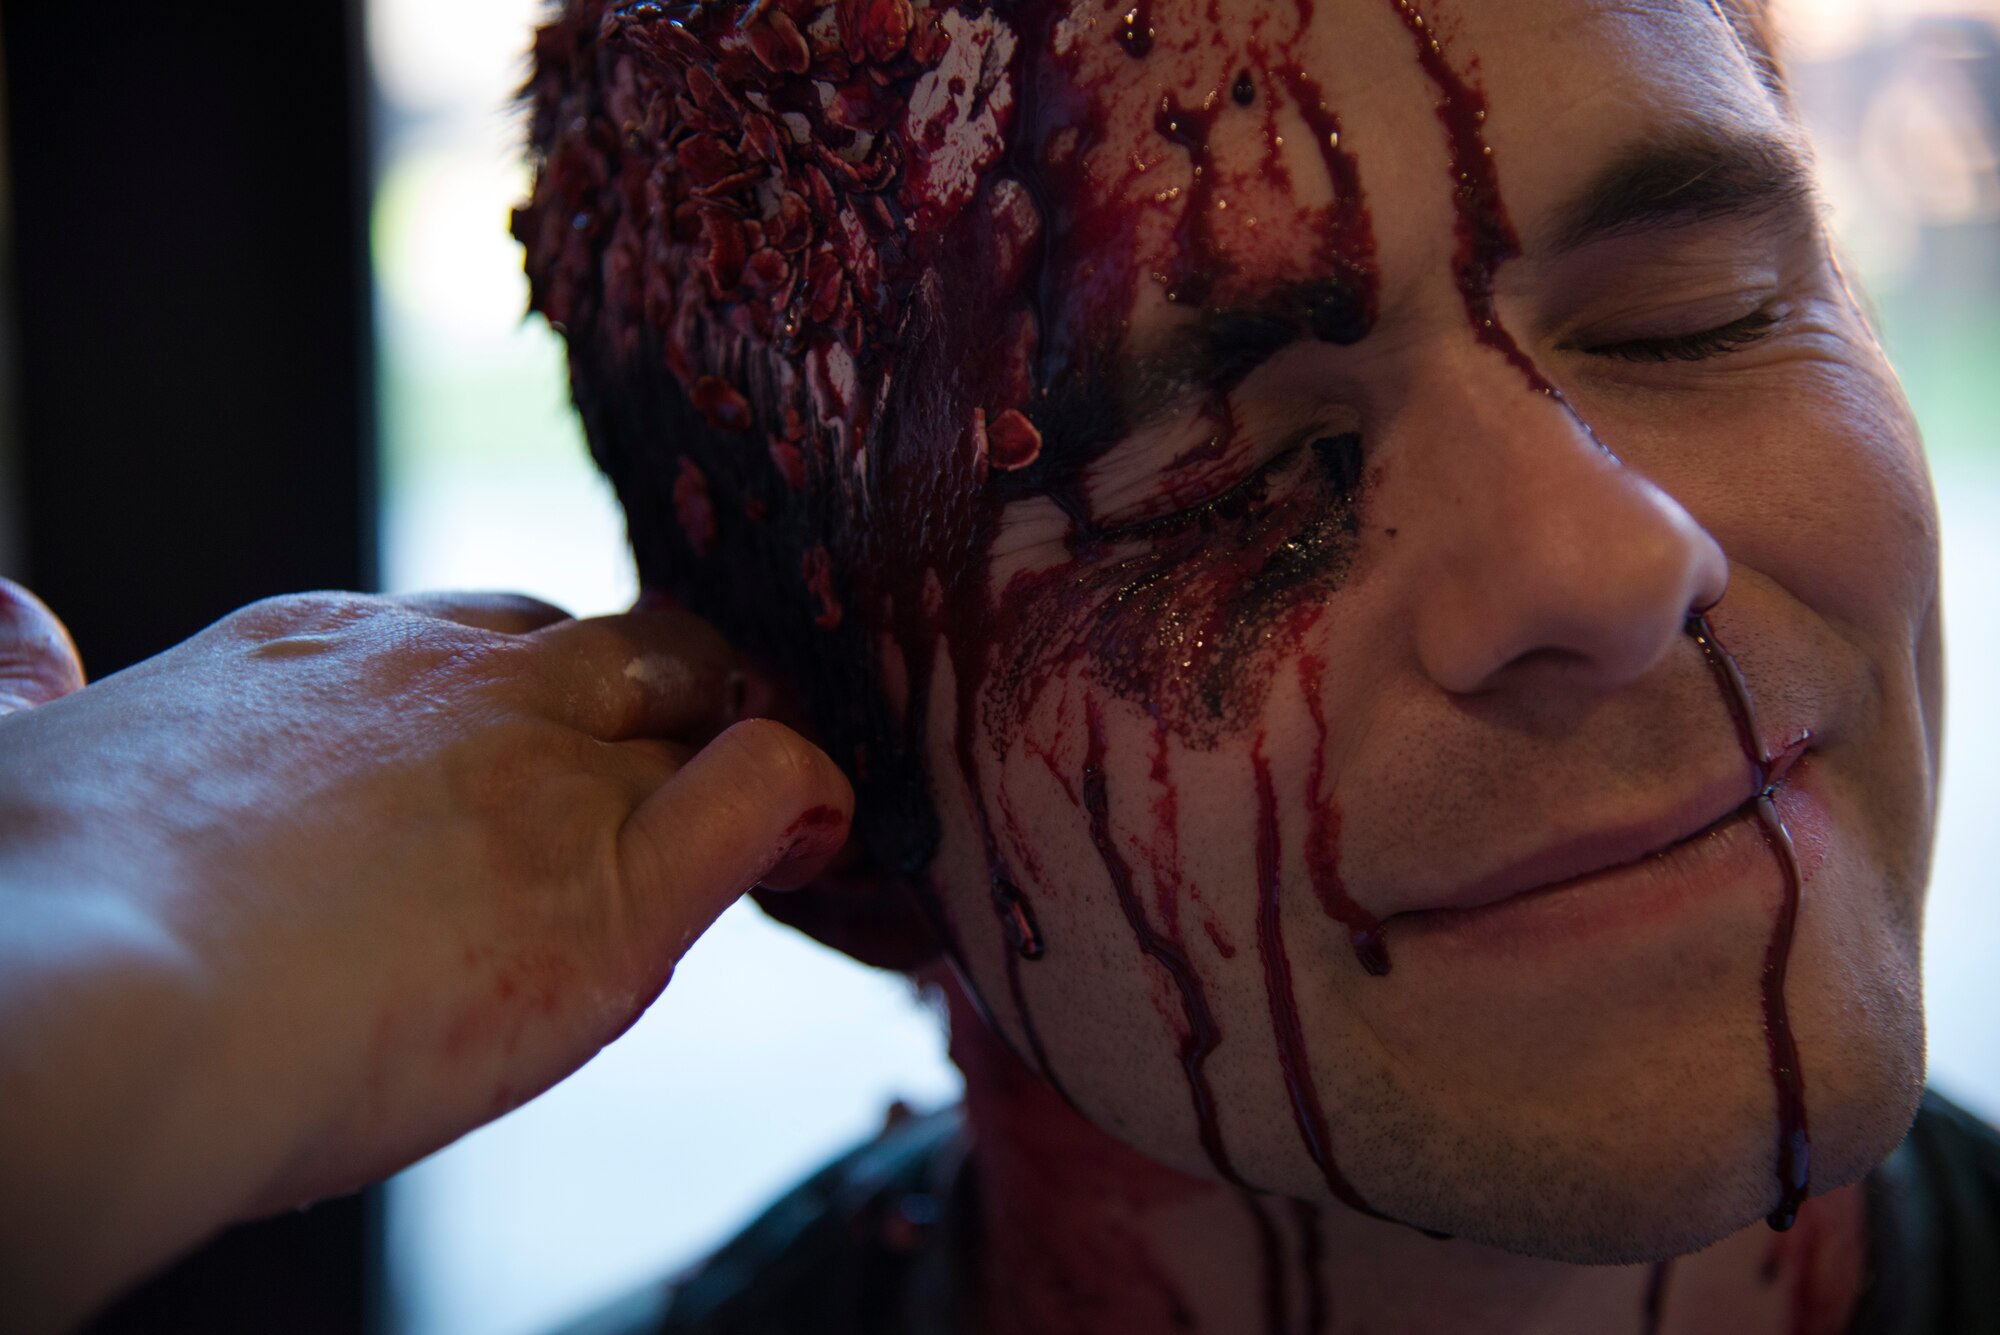 Capt. Jace McCown, exercise volunteer, receives a moulage injury during an emergency-readiness exercise at Joint Base Andrews, Md., Aug. 13, 2015. A combination of moulage, mock injuries and role-player acting created a realistic training environment. (U.S. Air Force photo/Airman 1st Class Philip Bryant)